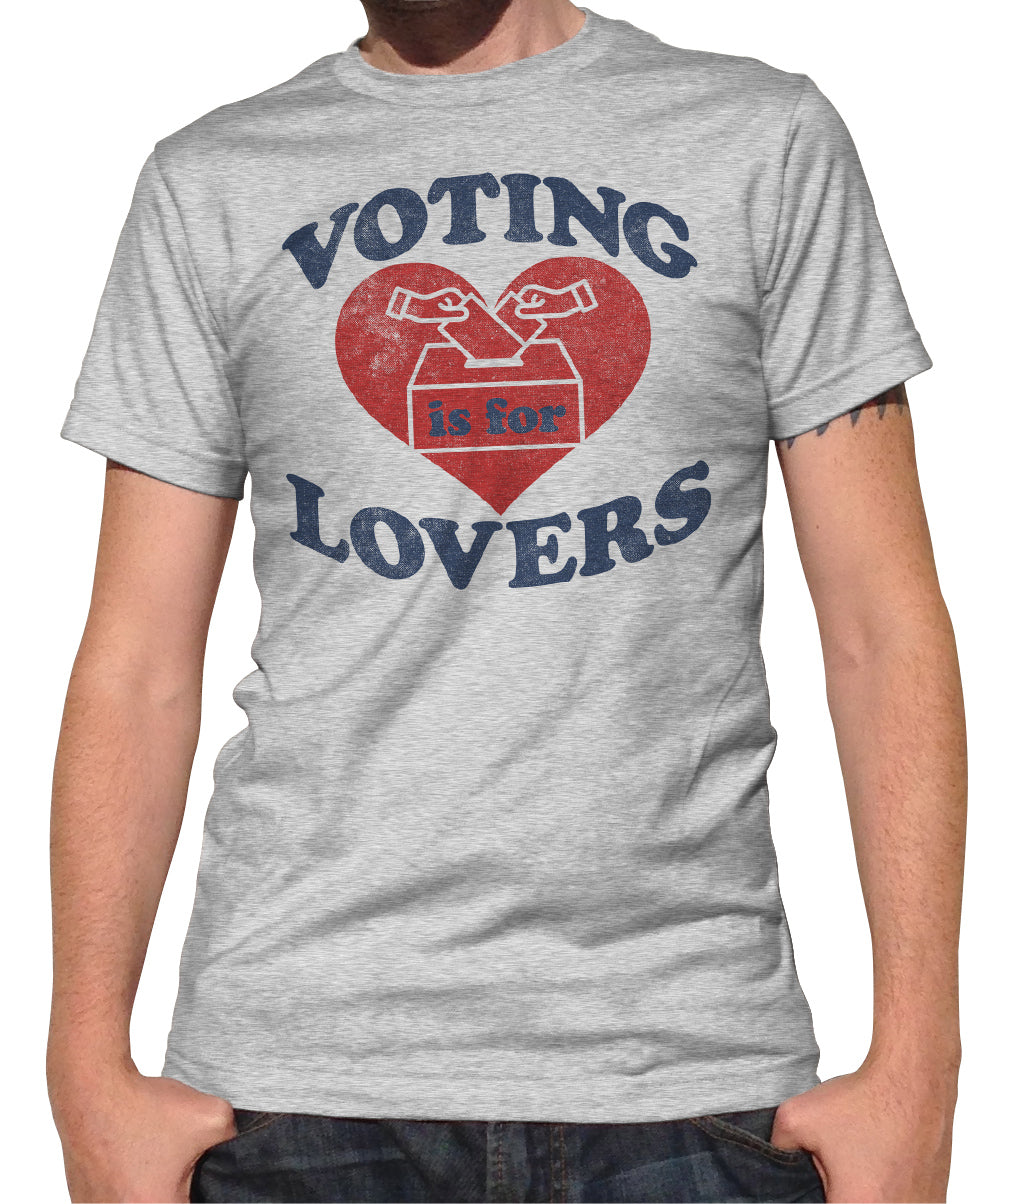 Men's Voting Is For Lovers T-Shirt